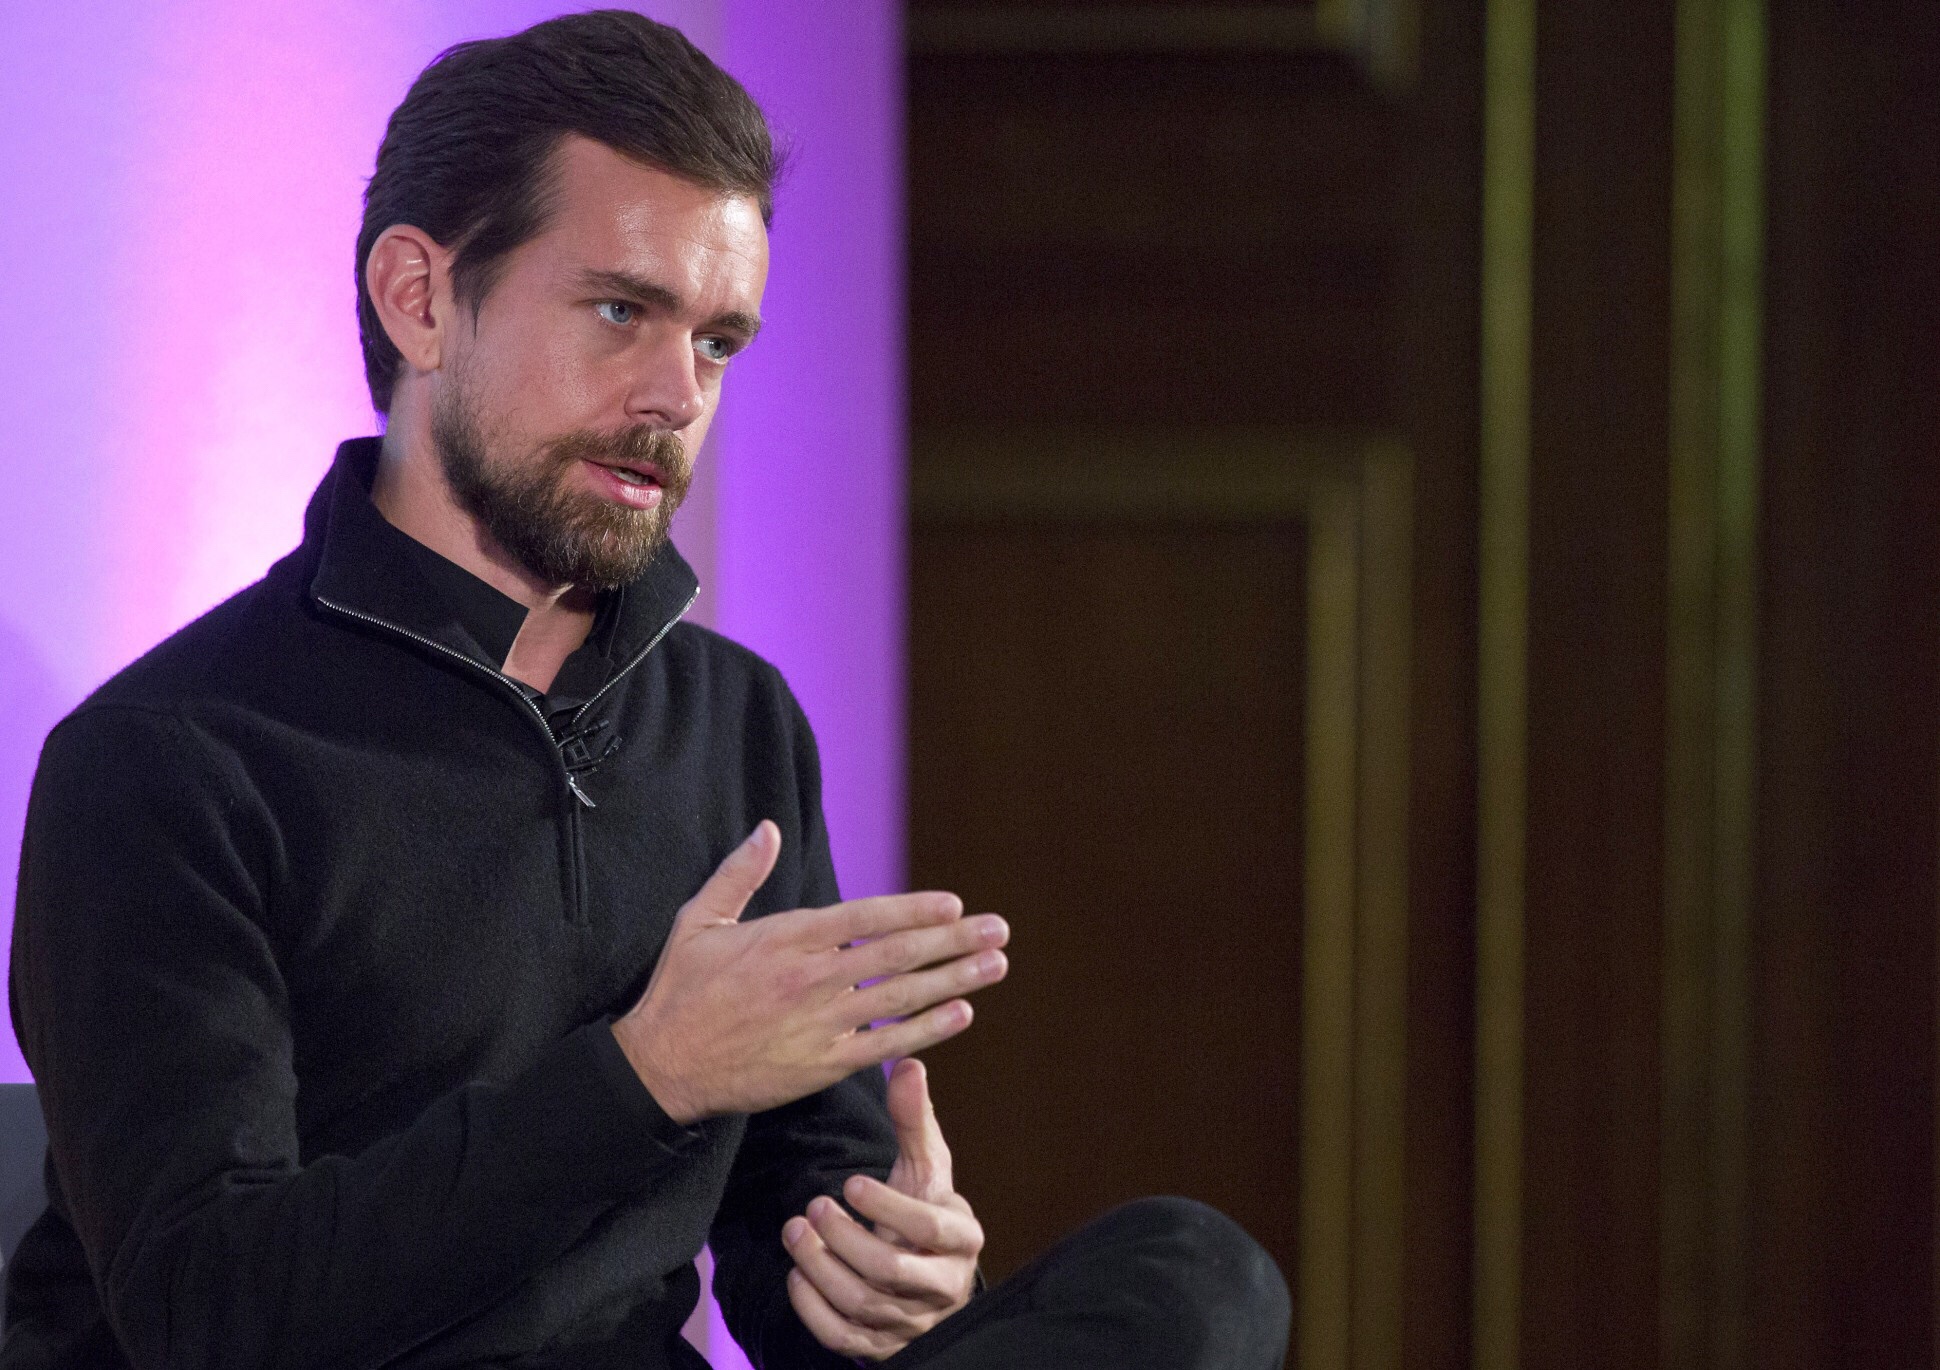 Twitter will now start enforcing stricter anti-hate rules